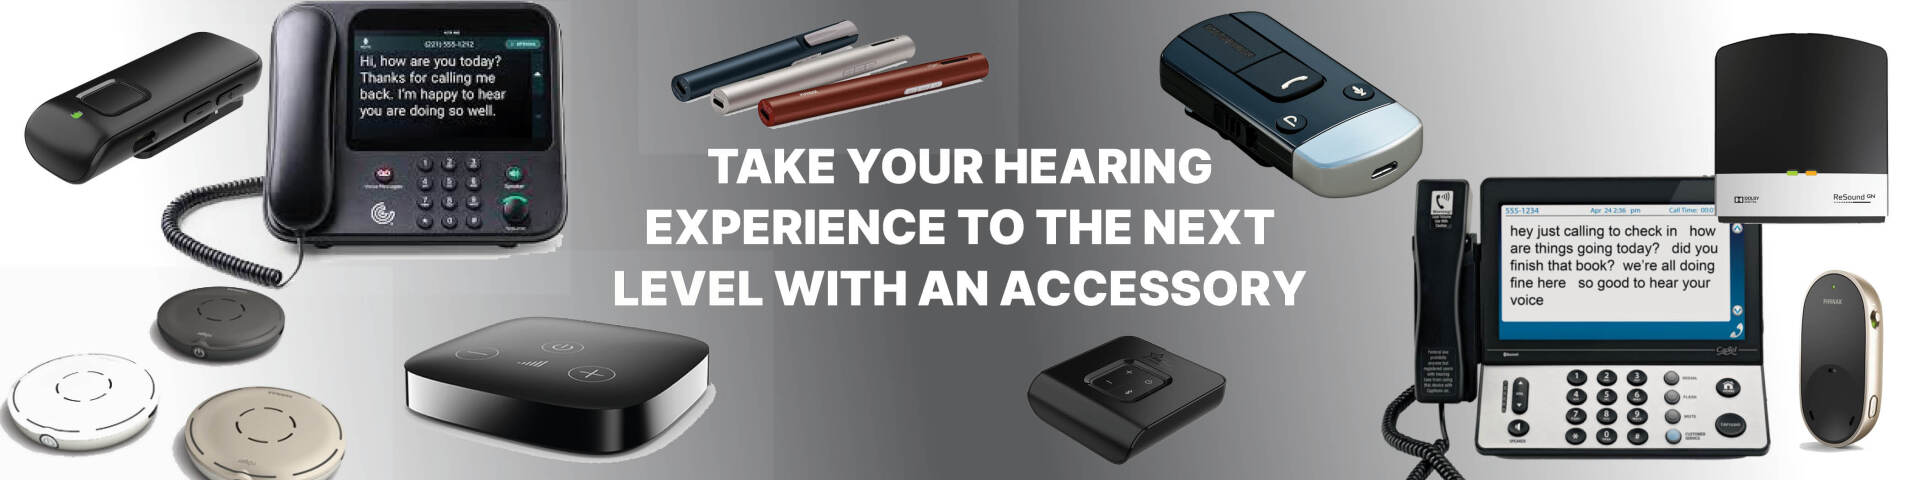 hearing accessories